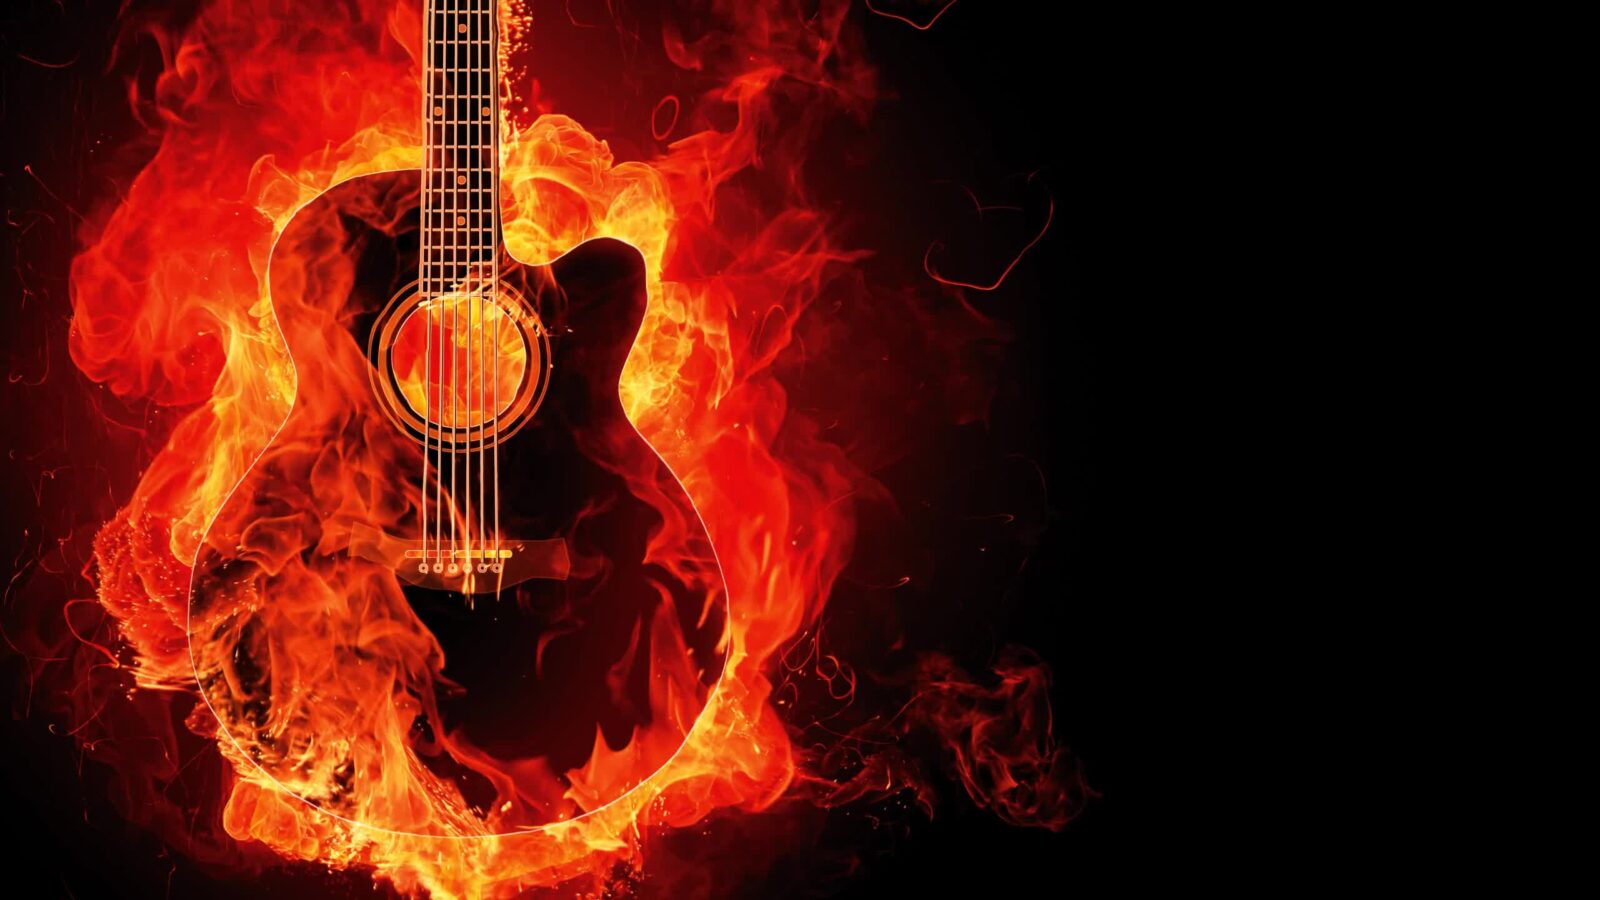 Live Desktop Wallpapers | Guitar Flame Fantasy Abstract 2K Quality - Free Live Wallpaper